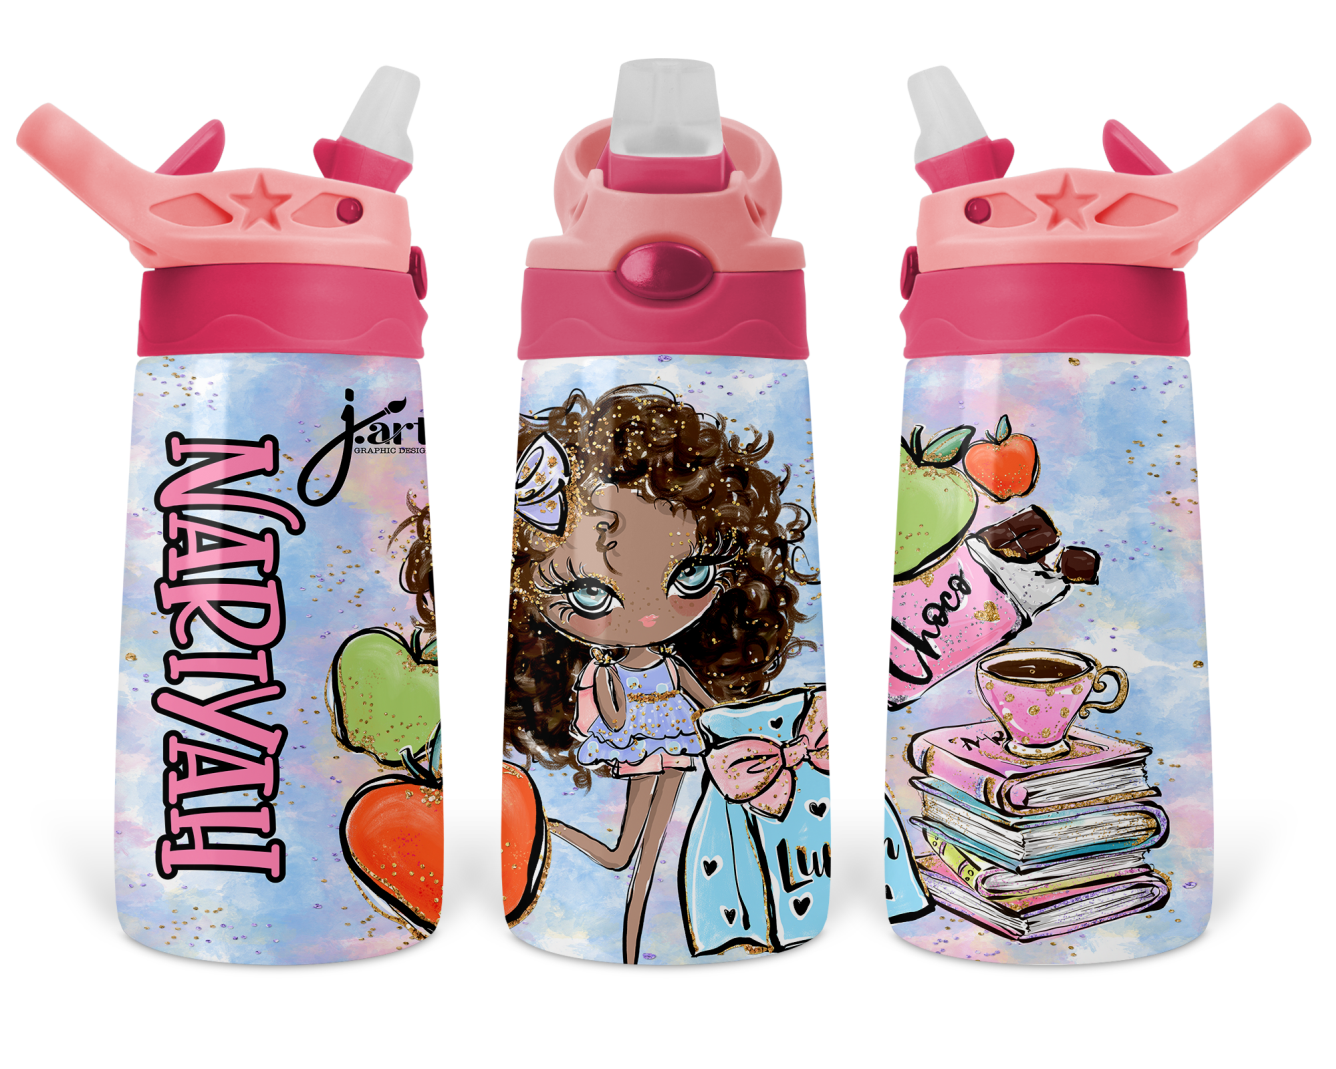 Personalized 12 ounce water bottle for kids with flip top lid and screw on  lid - fits in car cup holder - Tim's Pens and Gifts